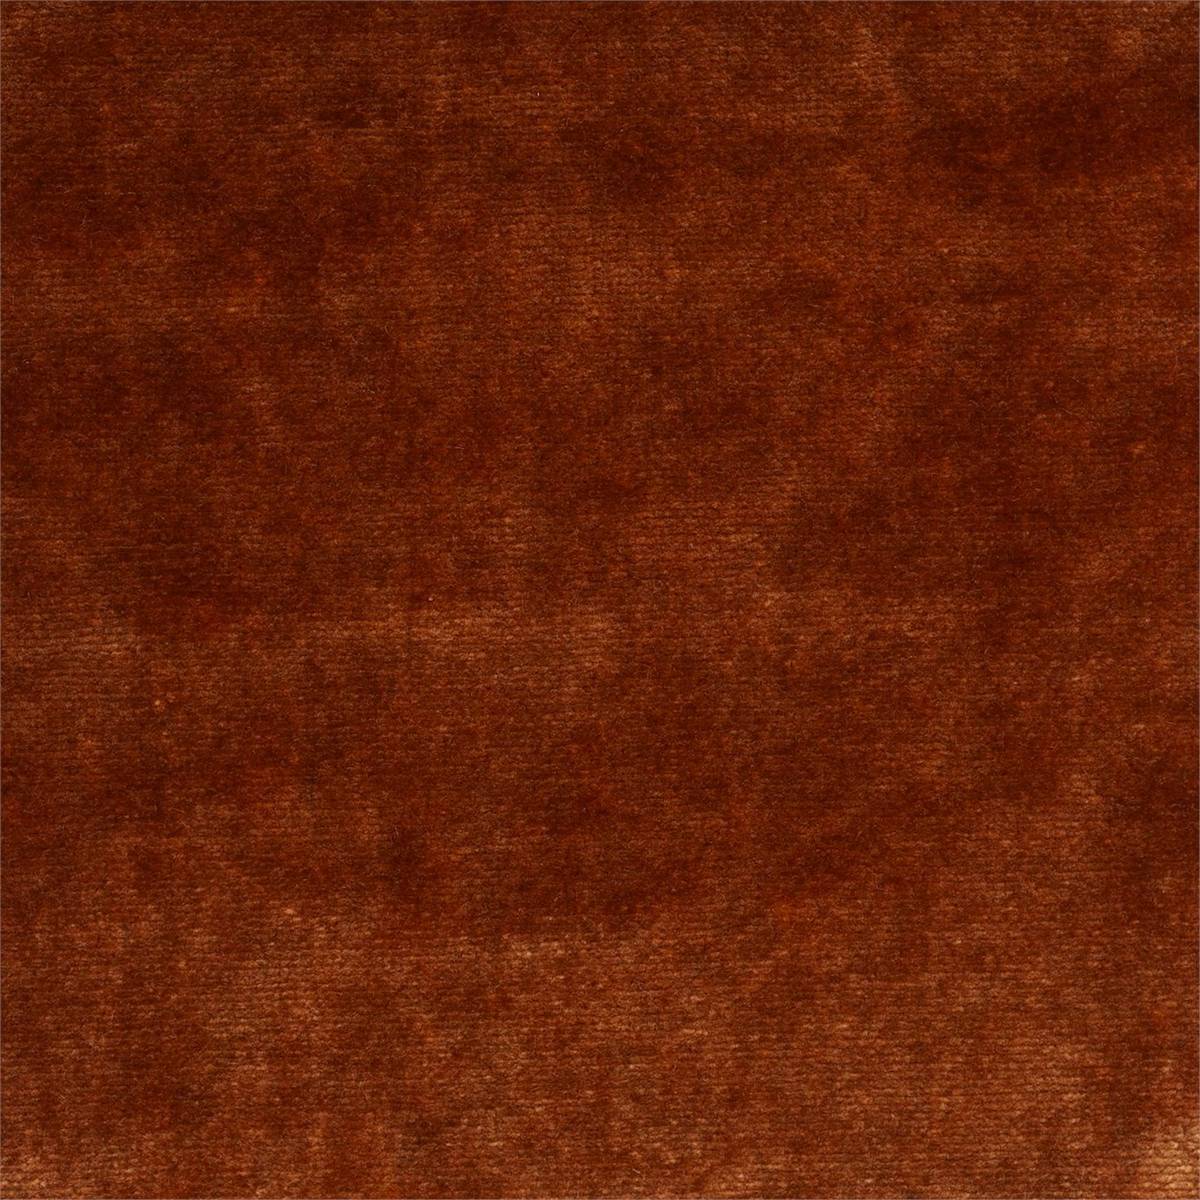 Boutique Velvets Spice Fabric by Harlequin